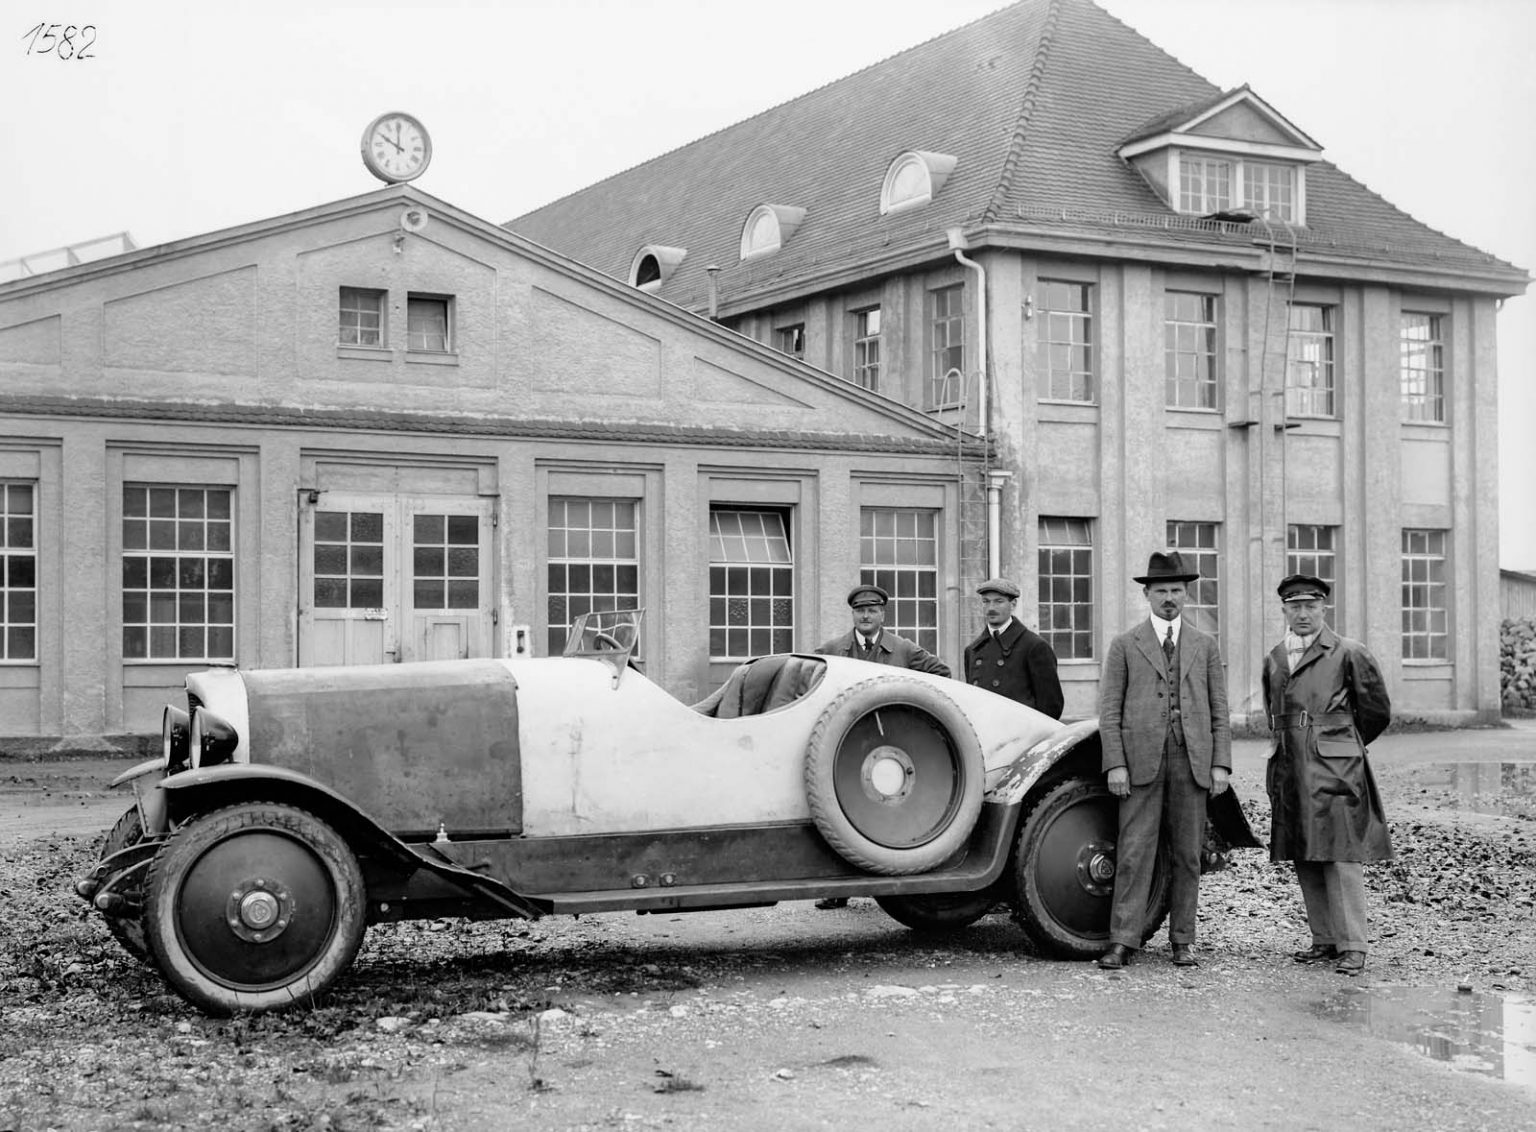 Karl Maybach (second from the right) next to a Maybach W 3 in front of the Maybach-Motorenbau GmbH production facility in the mid-1920s